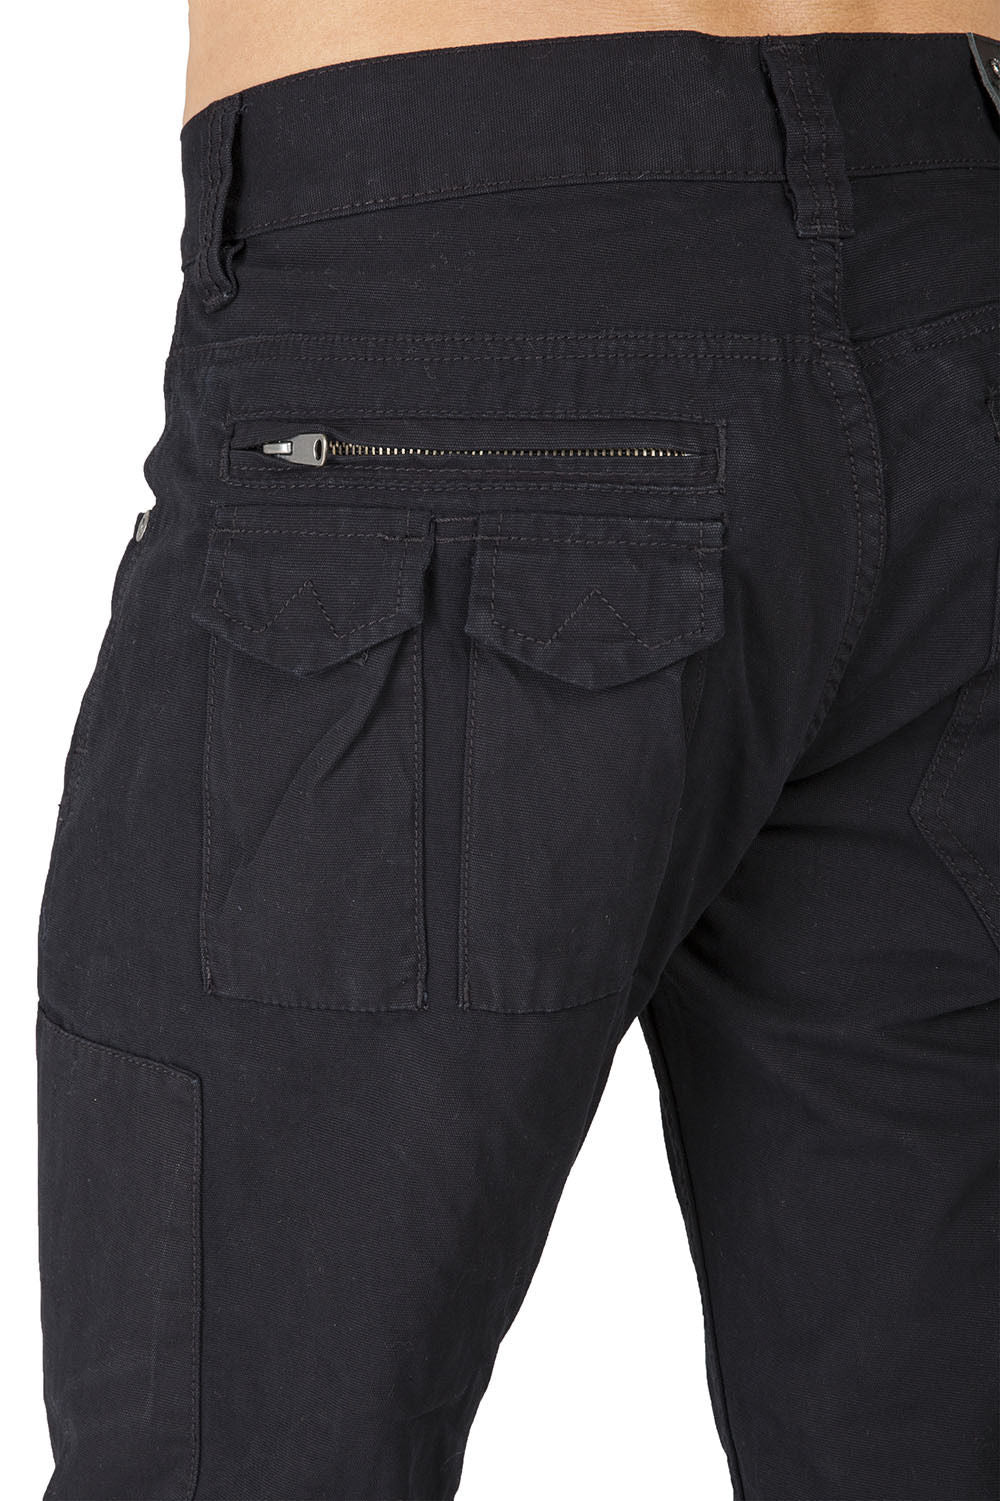 Black Relaxed Straight Premium Canvas Zipper Cargo Pocket Jeans, Garment Washed